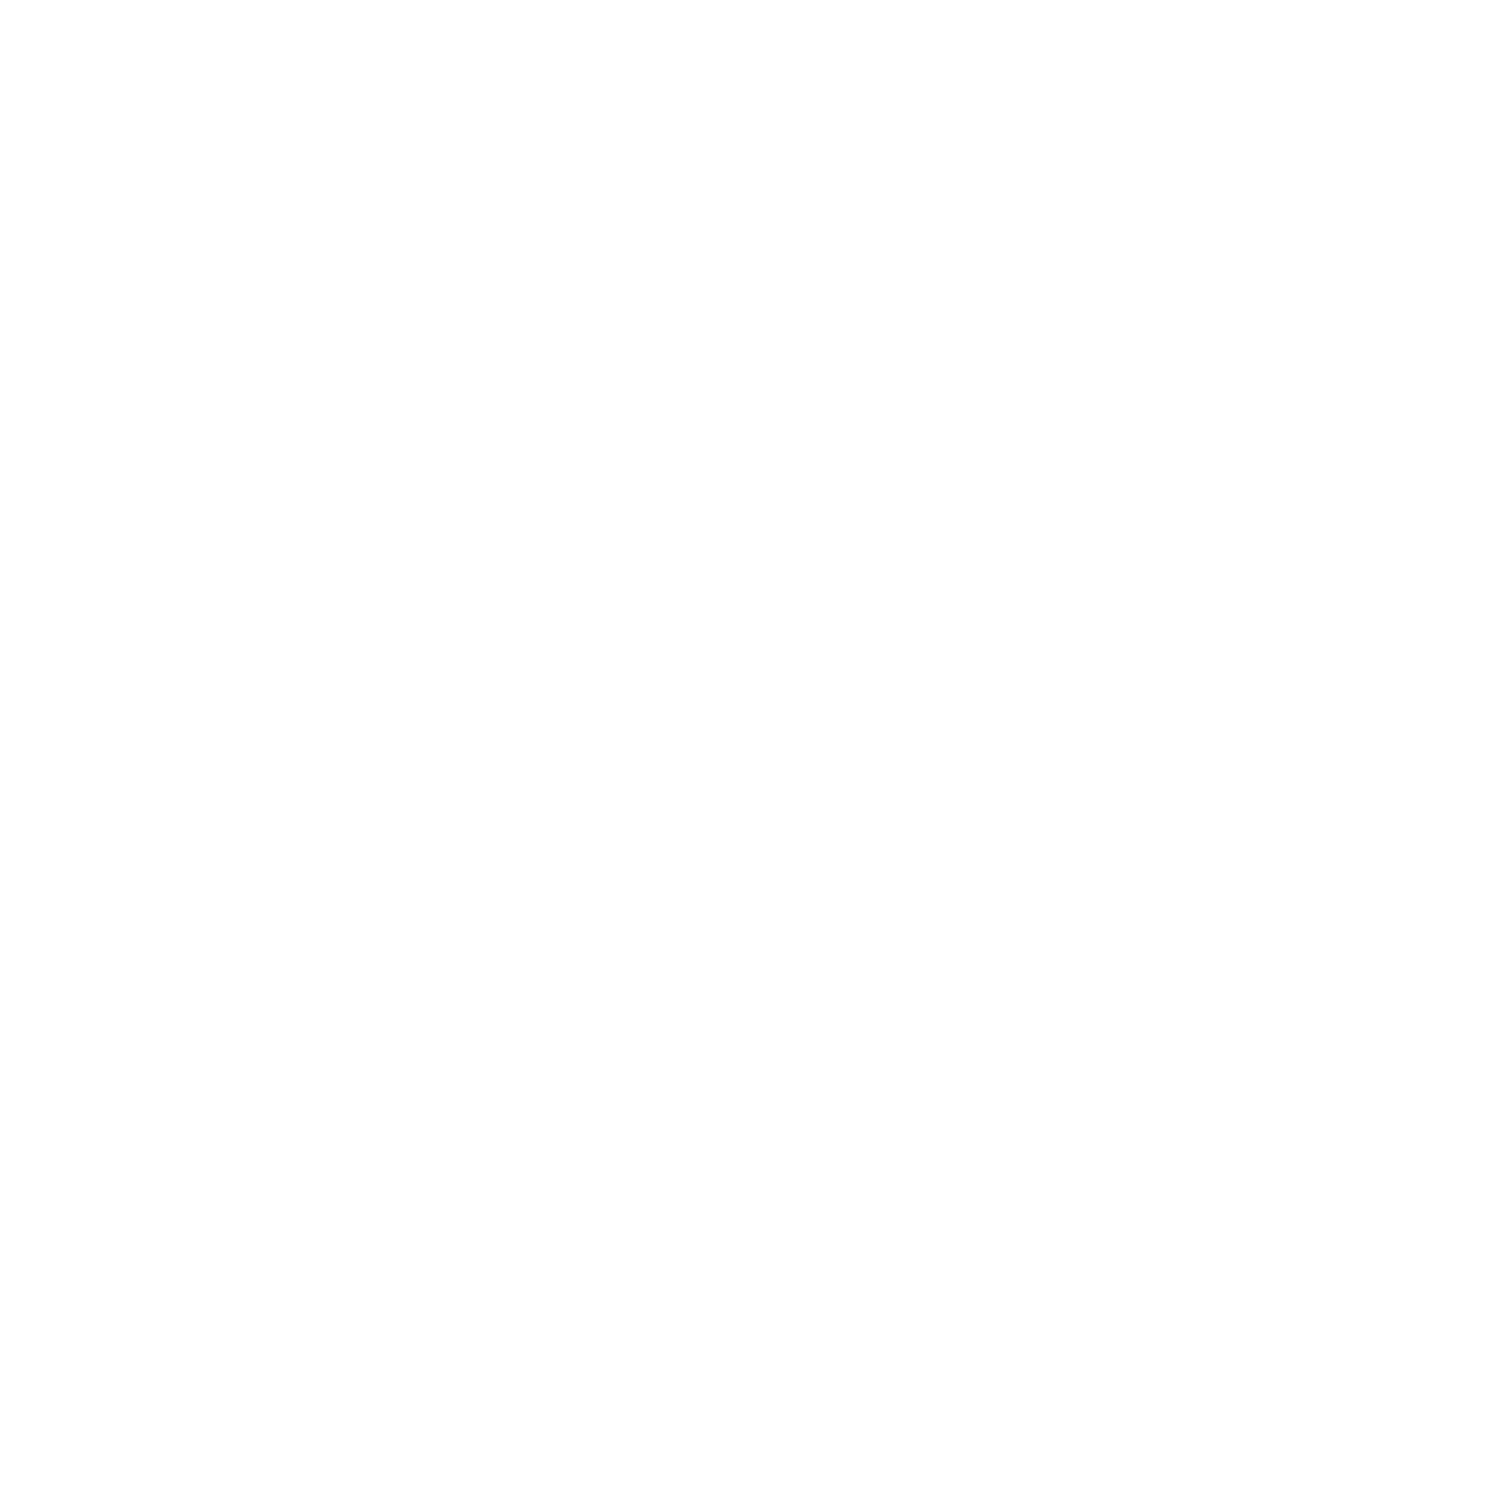 INDYCAR Ministry